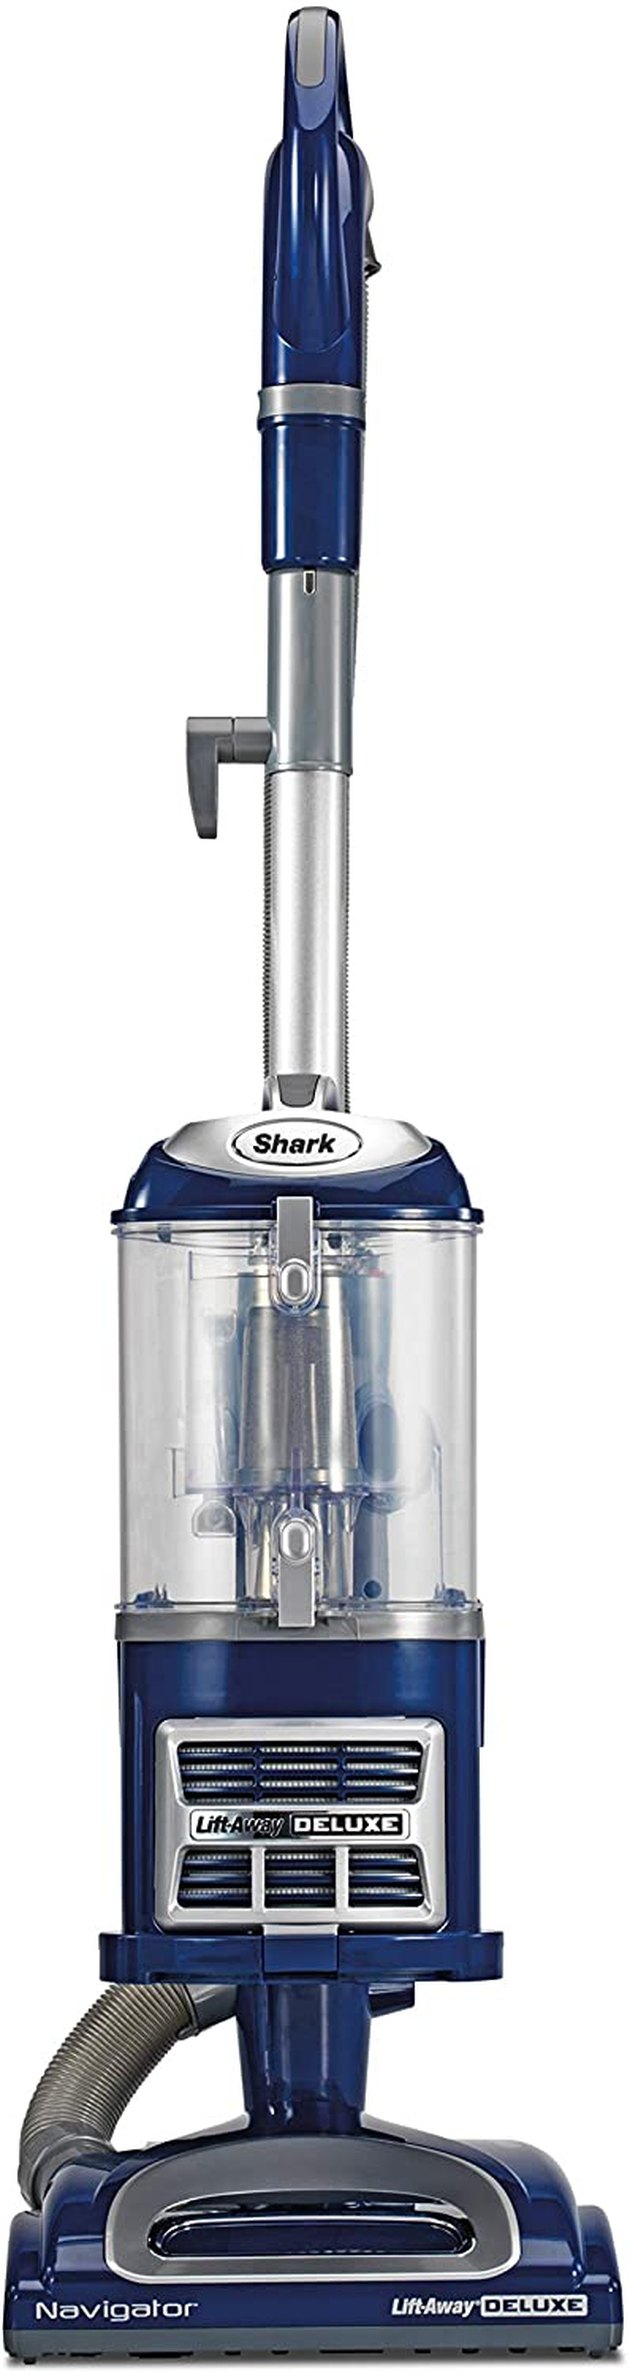 The real question is: What doesn't this product offer? This versatile Shark vacuum has two separate modes to accommodate all types of cleaning — the upright mode for traditional floor cleaning and the lift-away mode for vacuuming stairs or cleaning overhead. The latter allows you to separate the lightweight pod from the base, so you won't have to lug around the entire vacuum. You'll also enjoy Anti-Allergen Complete Seal Technology, swivel steering, and a large capacity dust cup to clean up a storm without any interruption. 